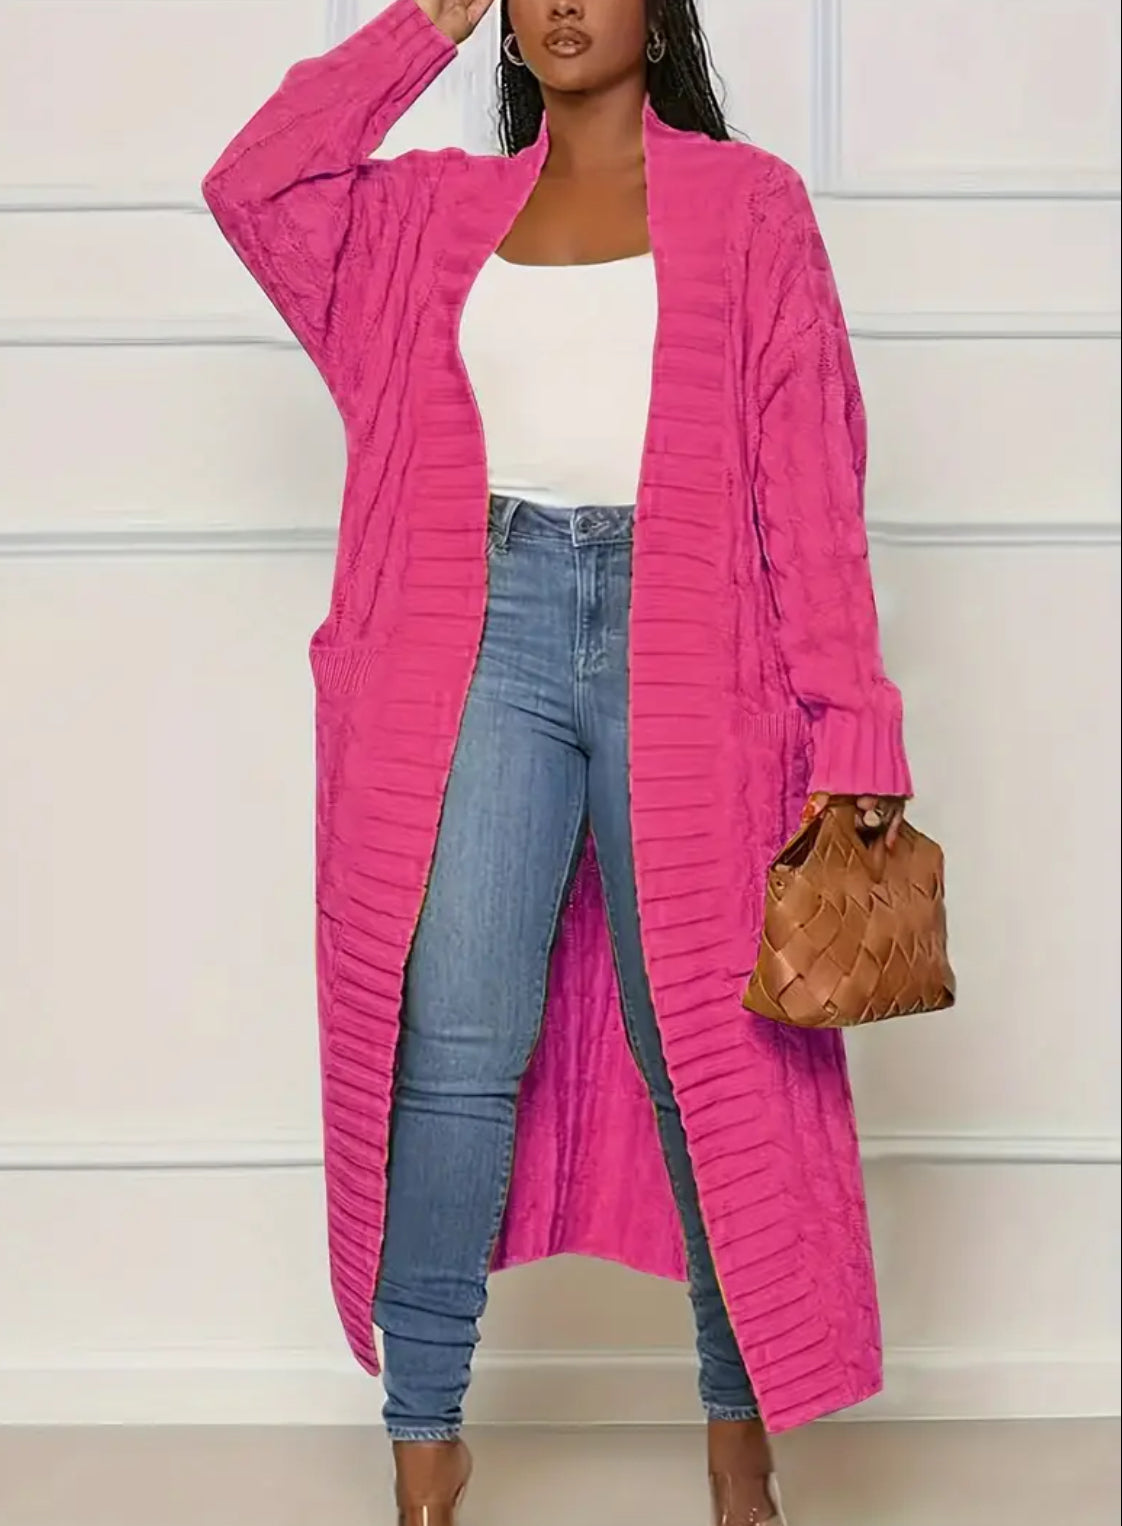 Posh 💋 Mommies Collection Plus Size Casual, Cable Knitted Long Sleeve, Open Front Medium Stretch Cardigan